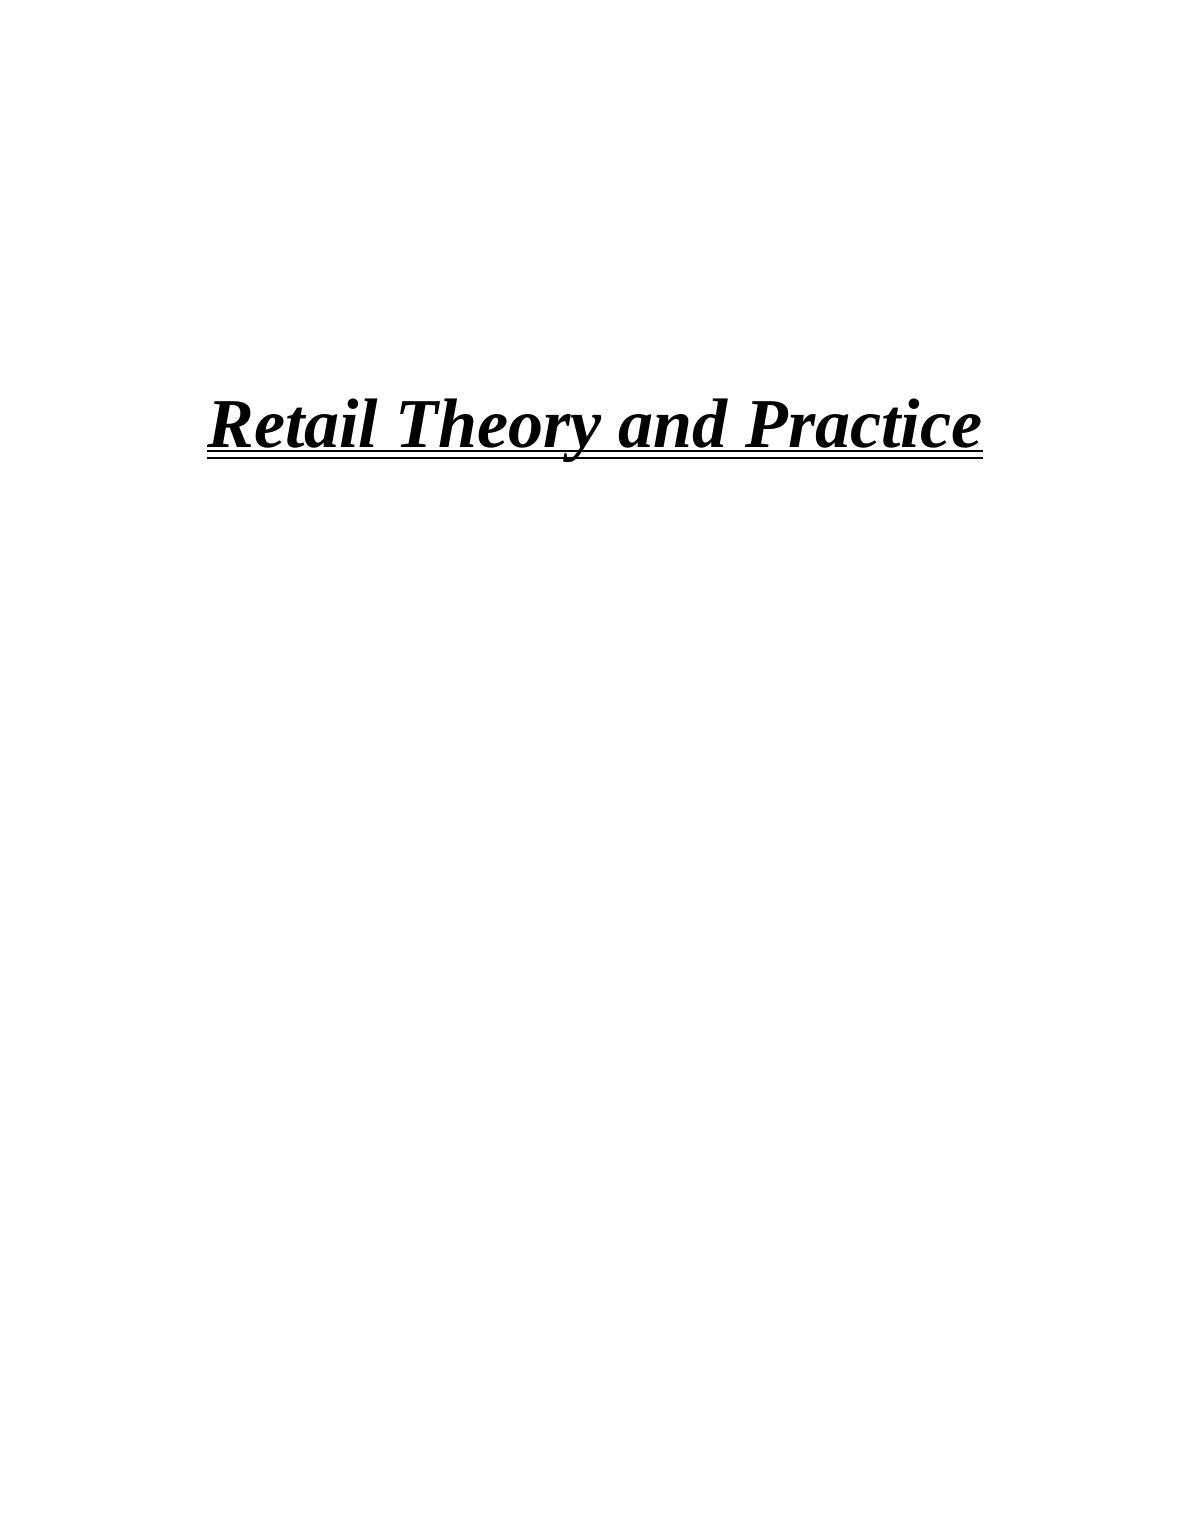 Retail Theory and Practice- Doc_1